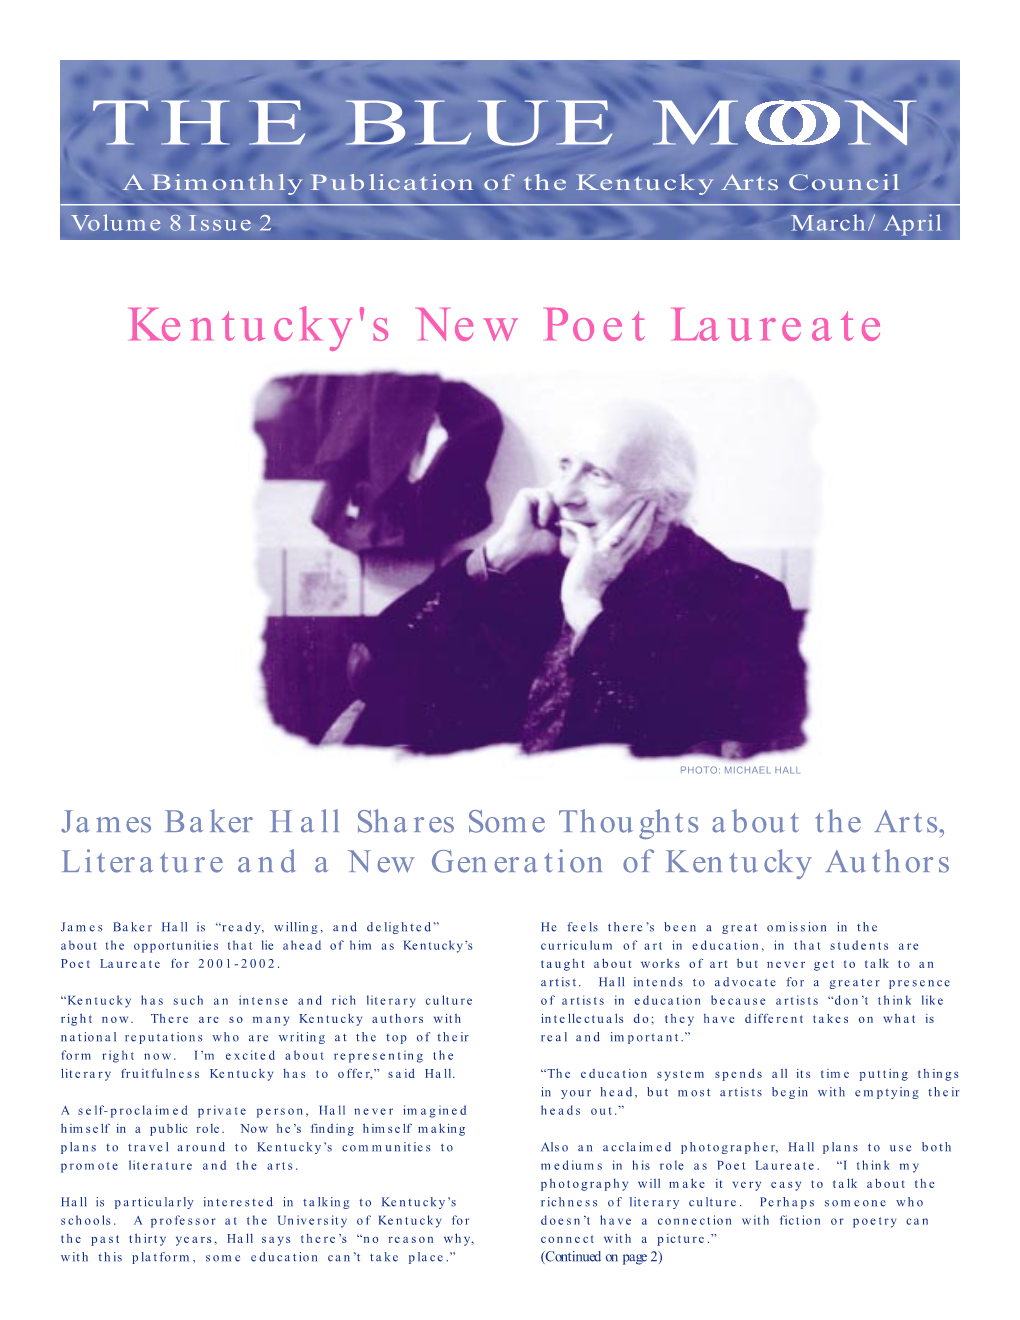 THE BLUE M N a Bimonthly Publication of the Kentucky Arts Council Volume 8 Issue 2 March/April 2001 Kentucky's New Poet Laureate